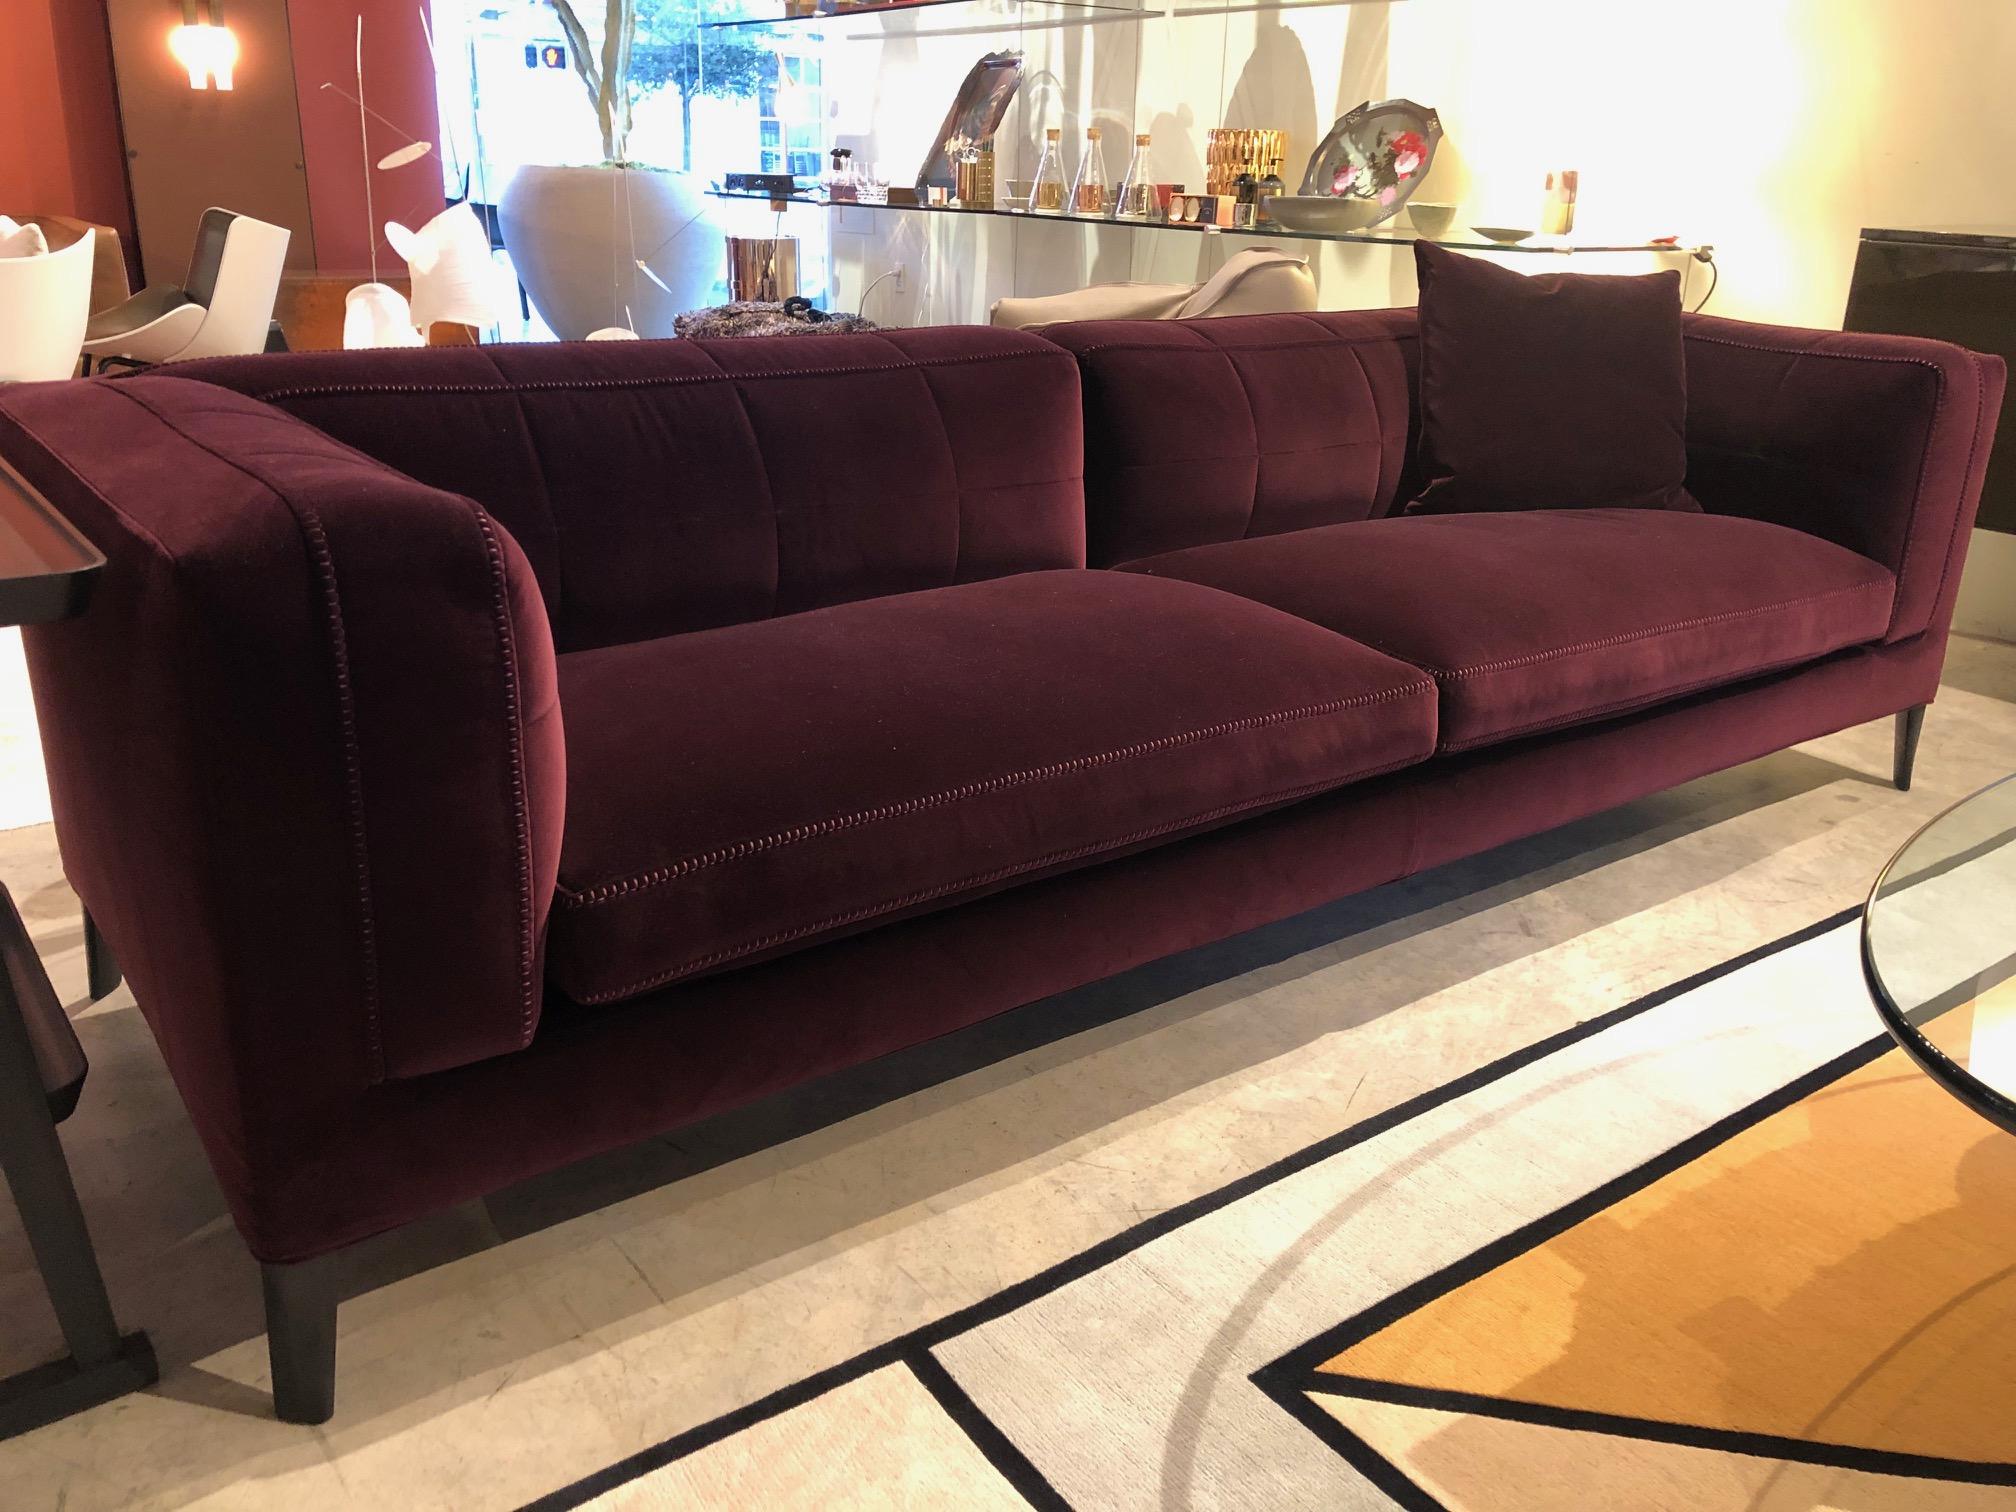 Dives is the ultimate sofa that has a taut cover on the outside and a quilted effect on the inside inspired by the classic Chesterfield sofa. This sofa is luxurious and comfortable.